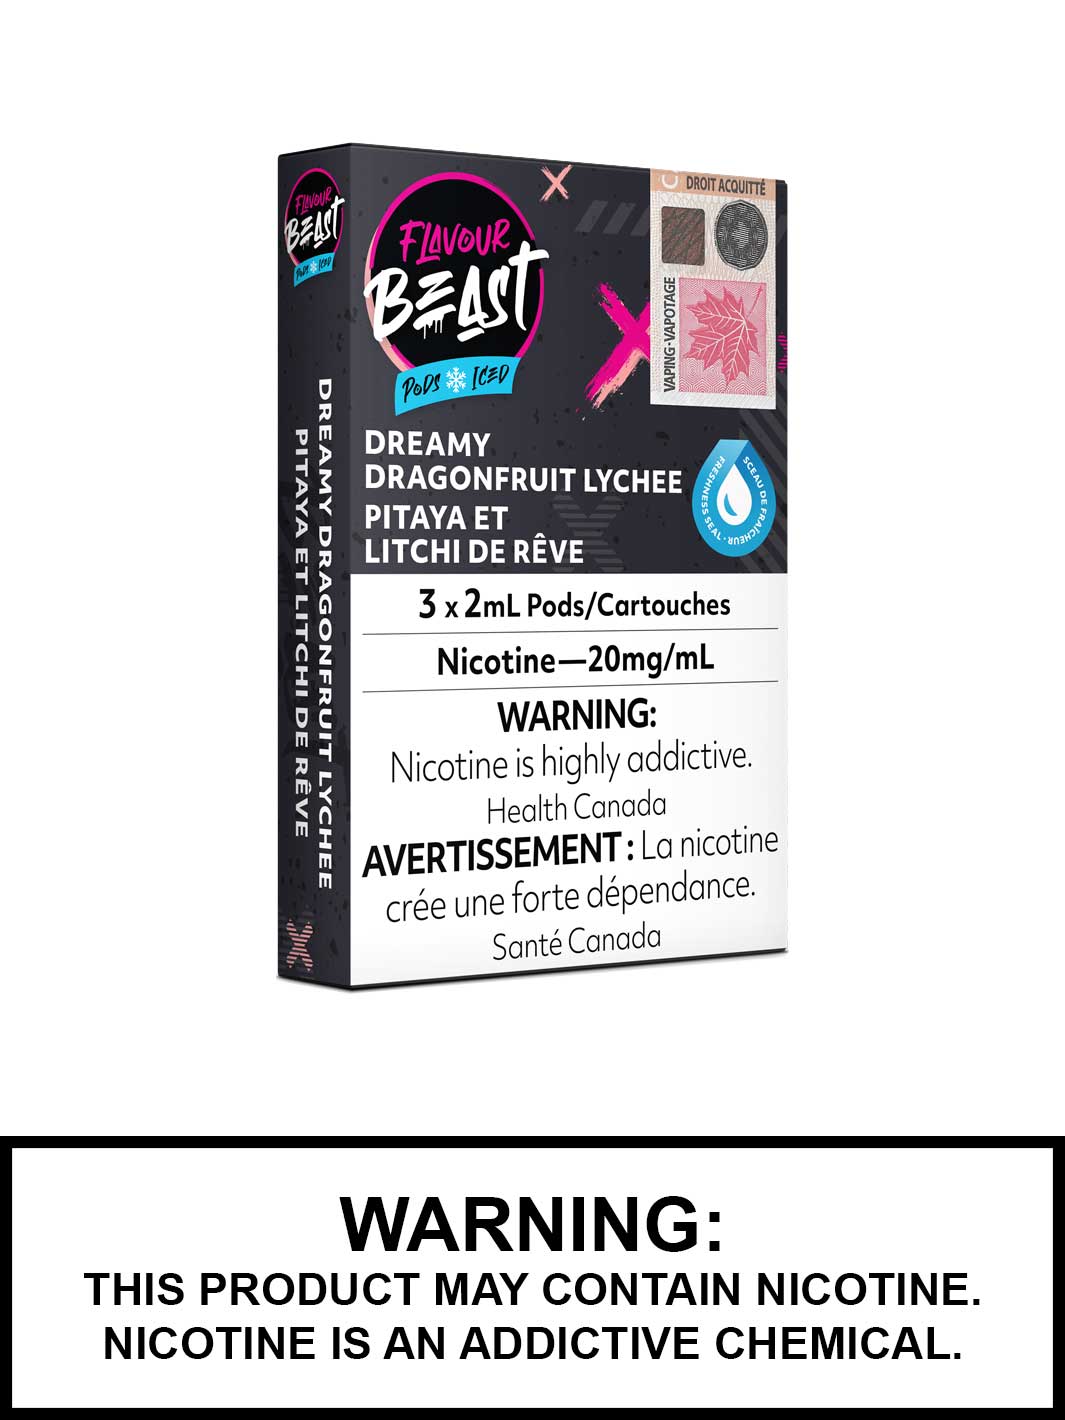 Dreamy Dragonfruit Lychee Iced Flavour Beast Pods, Vape Pods, Flavour Beast Vape, Vape360